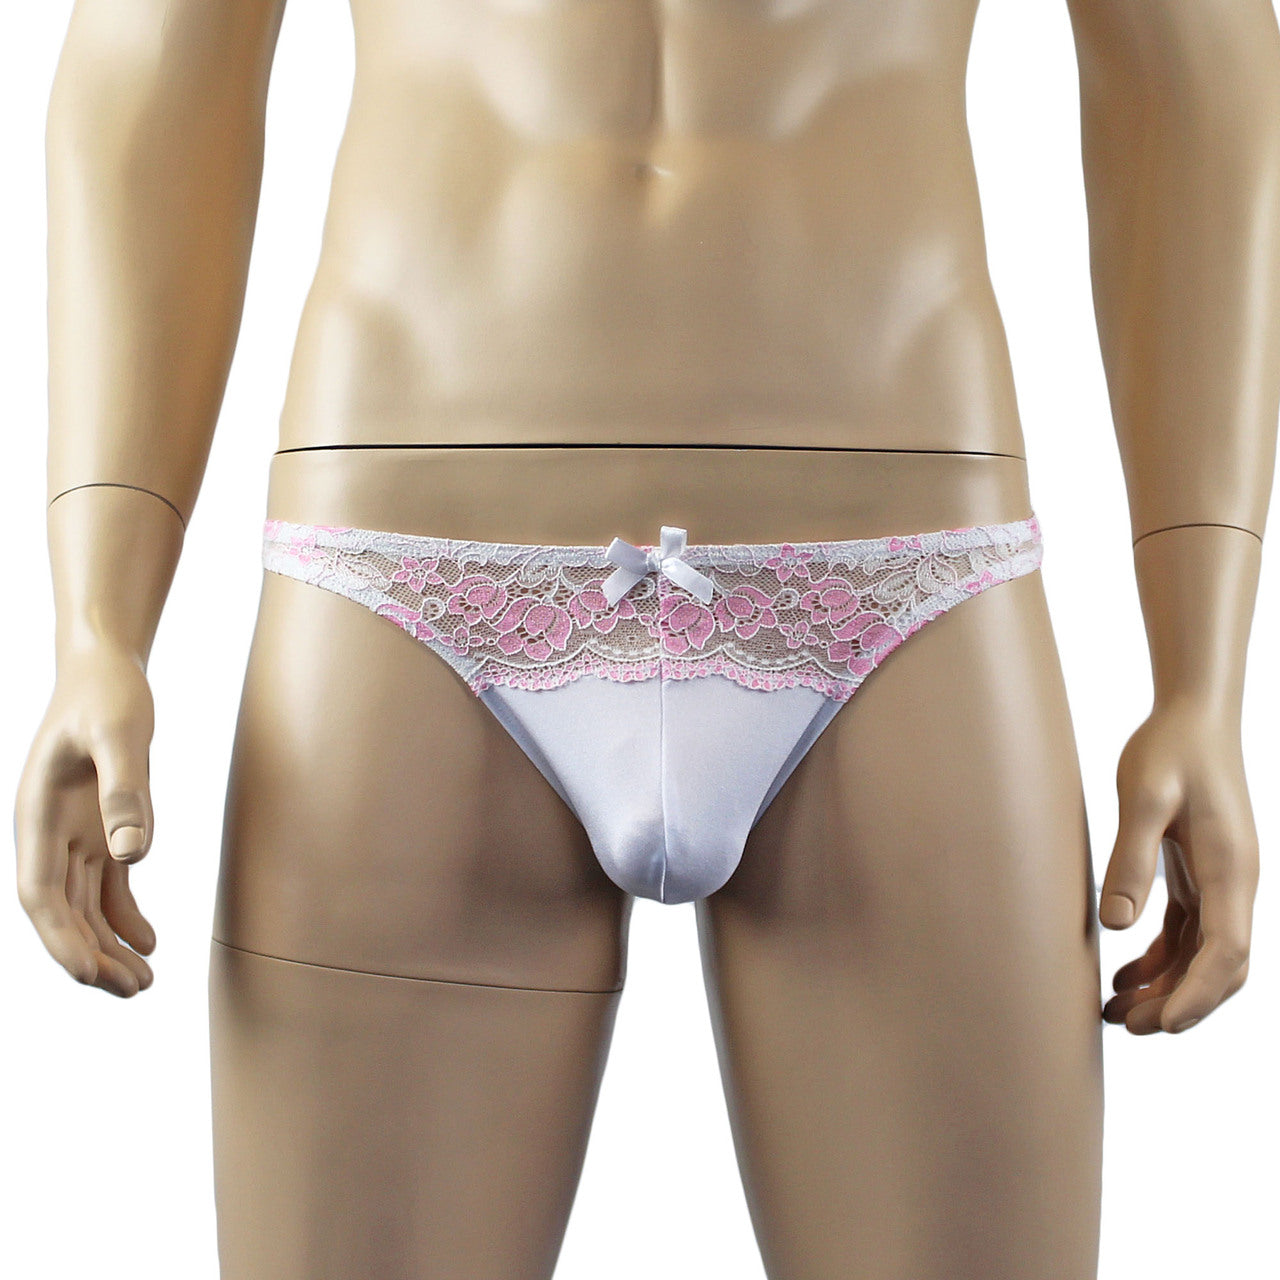 Mens Luxury Stretch G string Thong with Beautiful Lace Front White